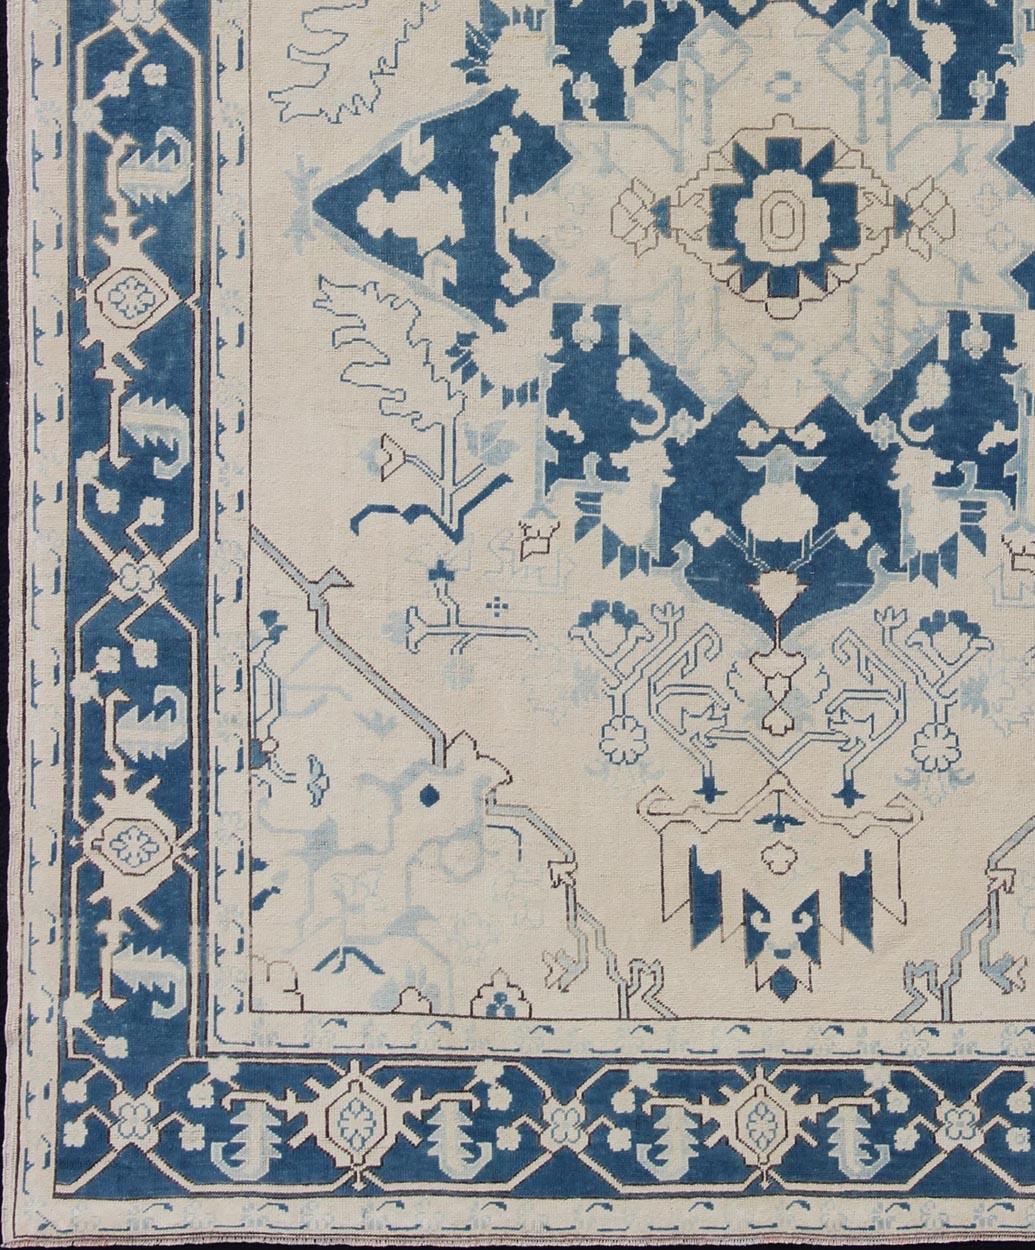 Geometric design  Medallion Oushak rug from 1940's Turkey in ivory and blue tones, rug en-165321, country of origin / type: Turkey / Oushak, circa 1940. Colors include shades of Royal blue, mid night blue, light blue and ivory.

Measures: 8'2 x